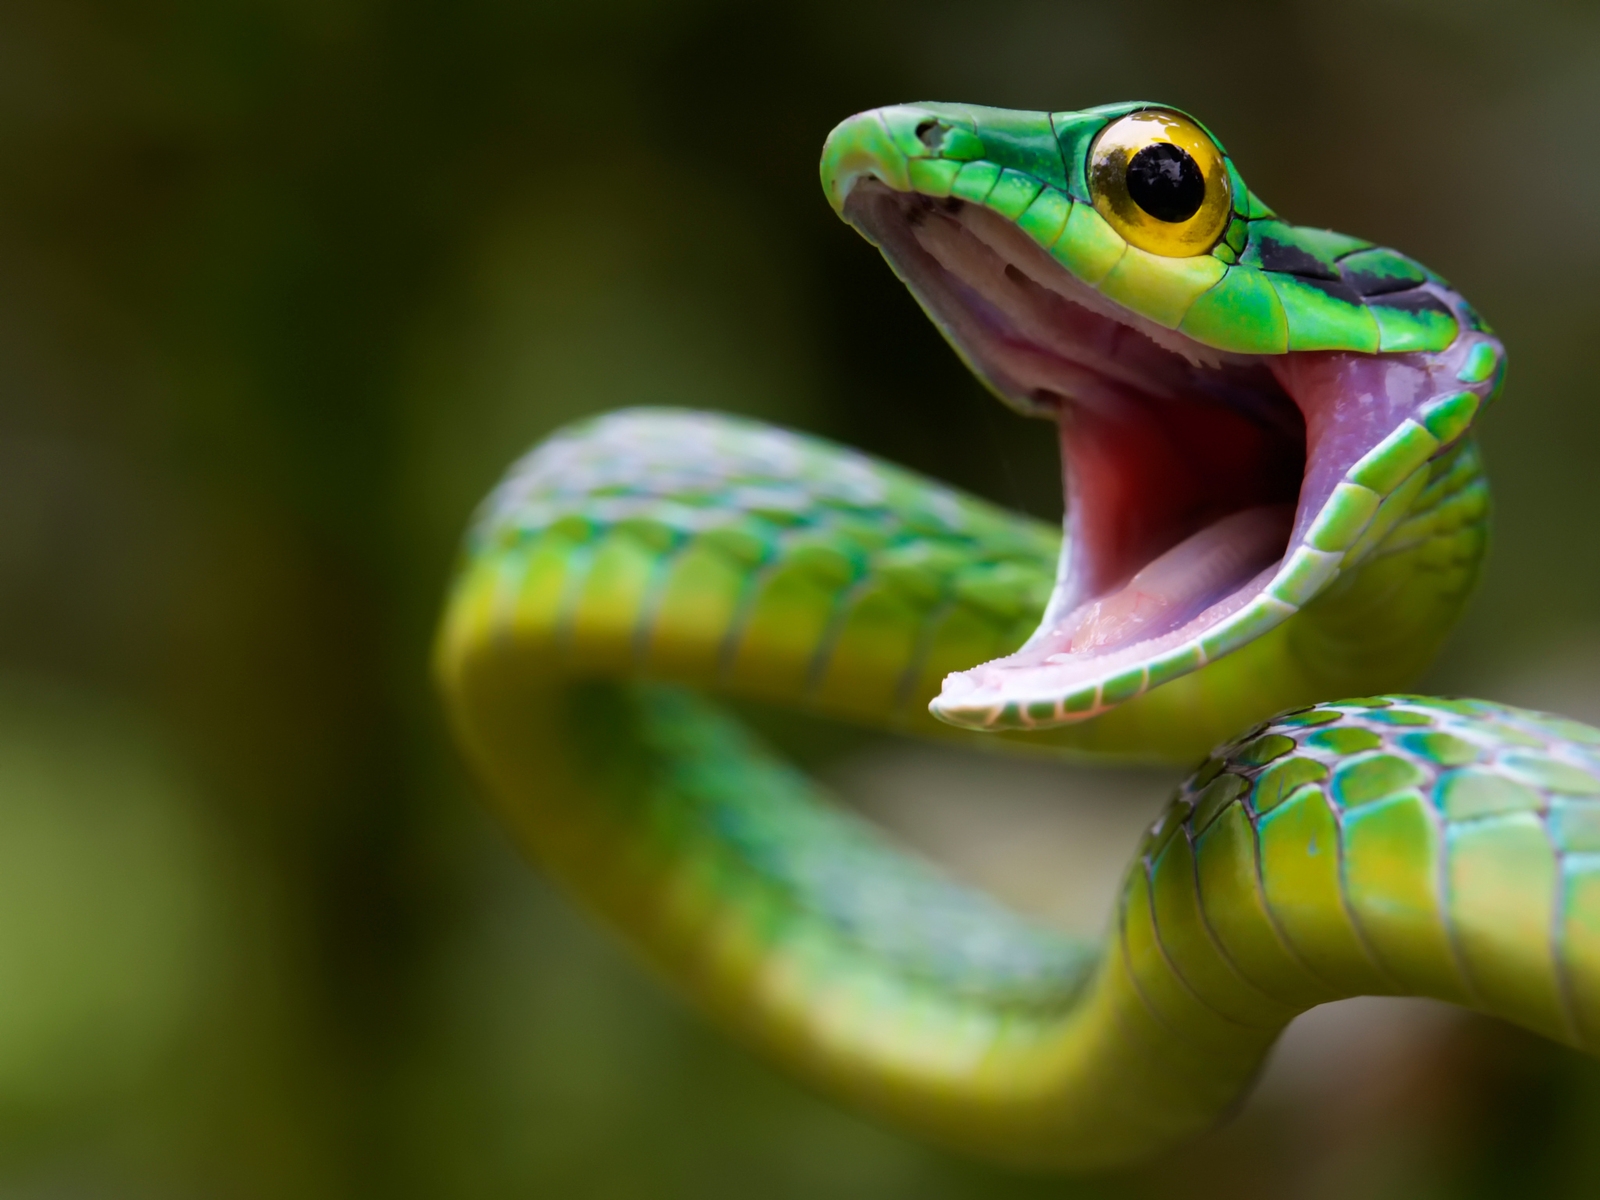 Green Snake Attack for 1600 x 1200 resolution